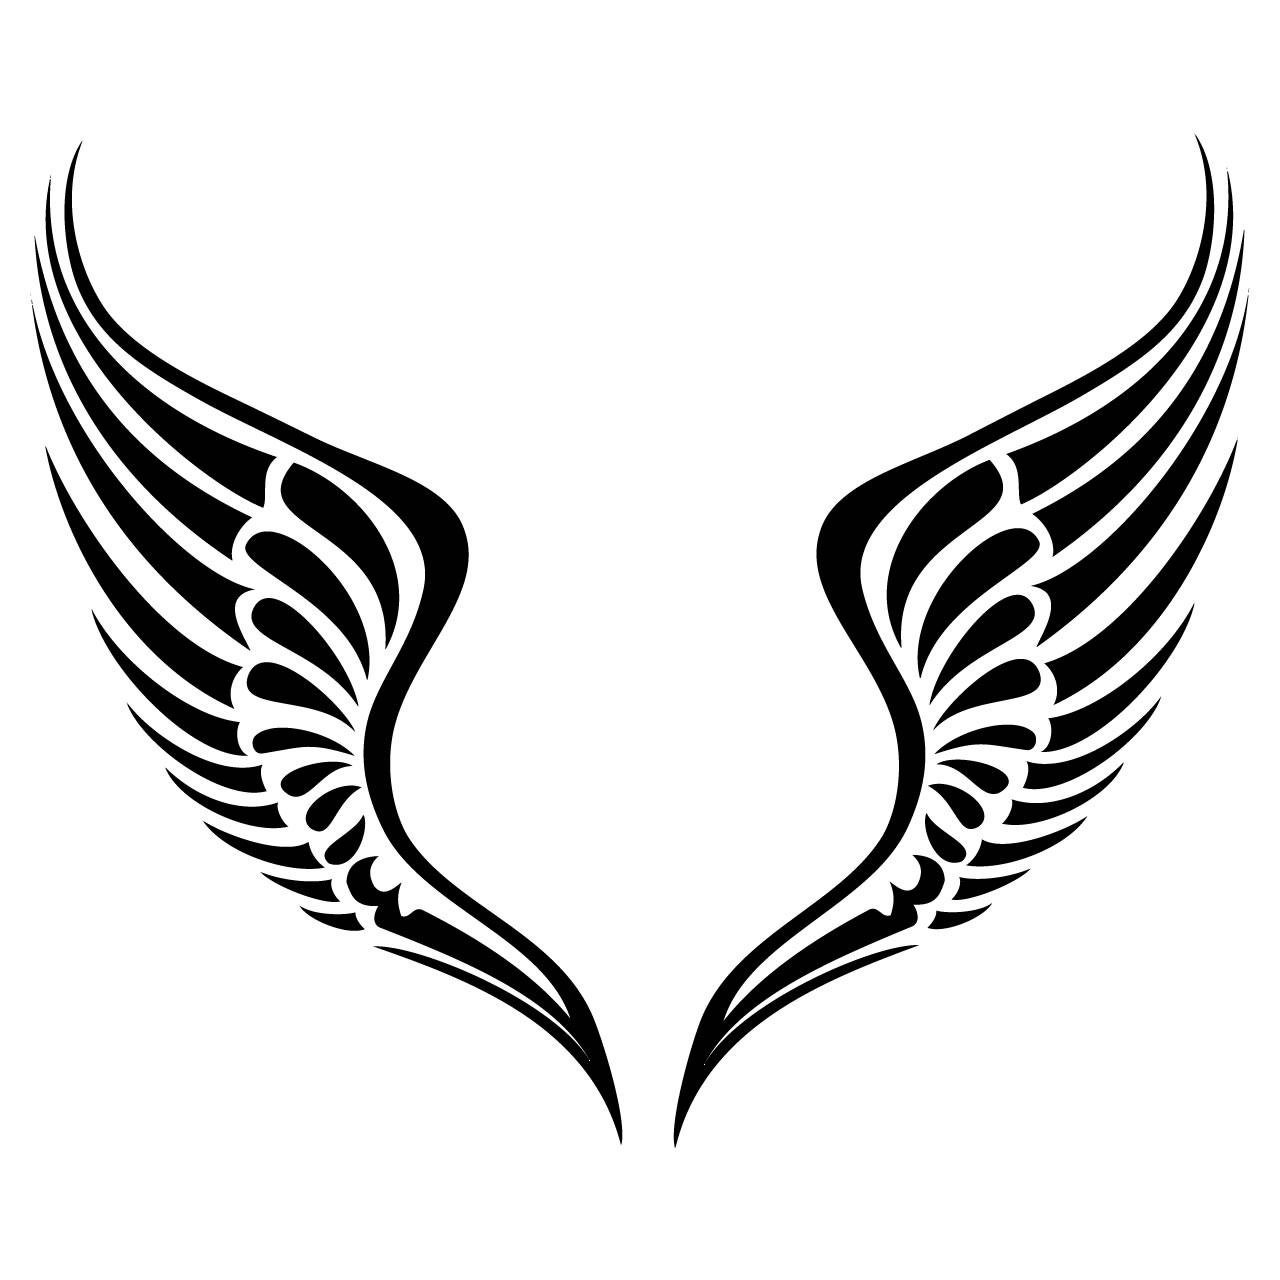 Angel wing clipart 0 white clip art angel wings 2 image - Clipartix